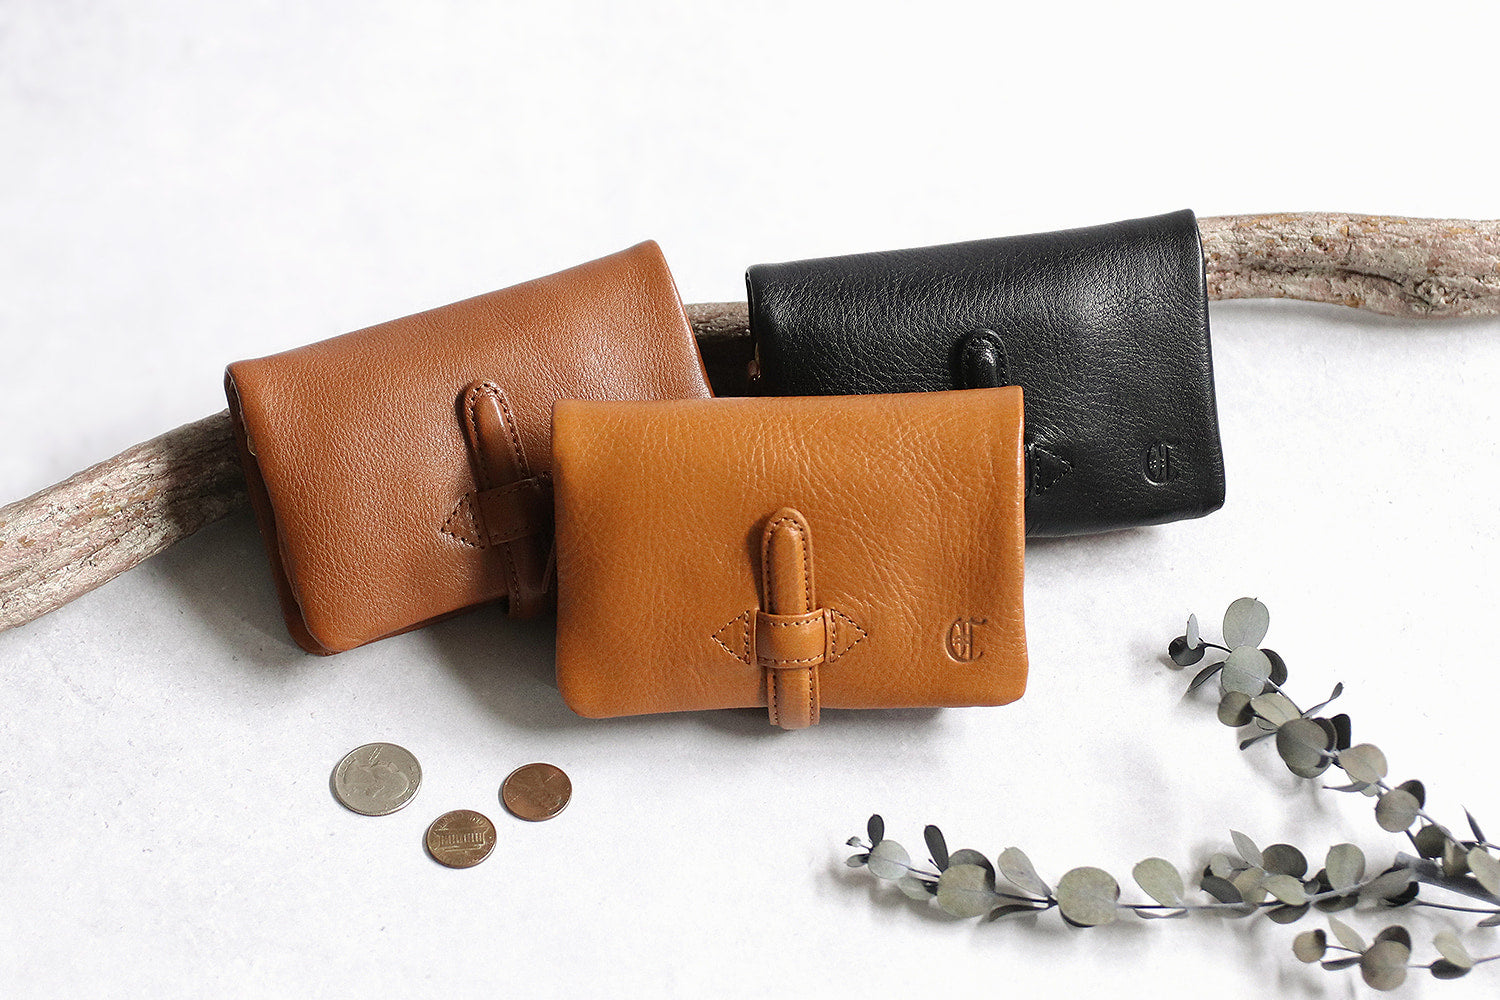 CLEDRAN ADRE Plump form Functional wallet made of cowhide leather 